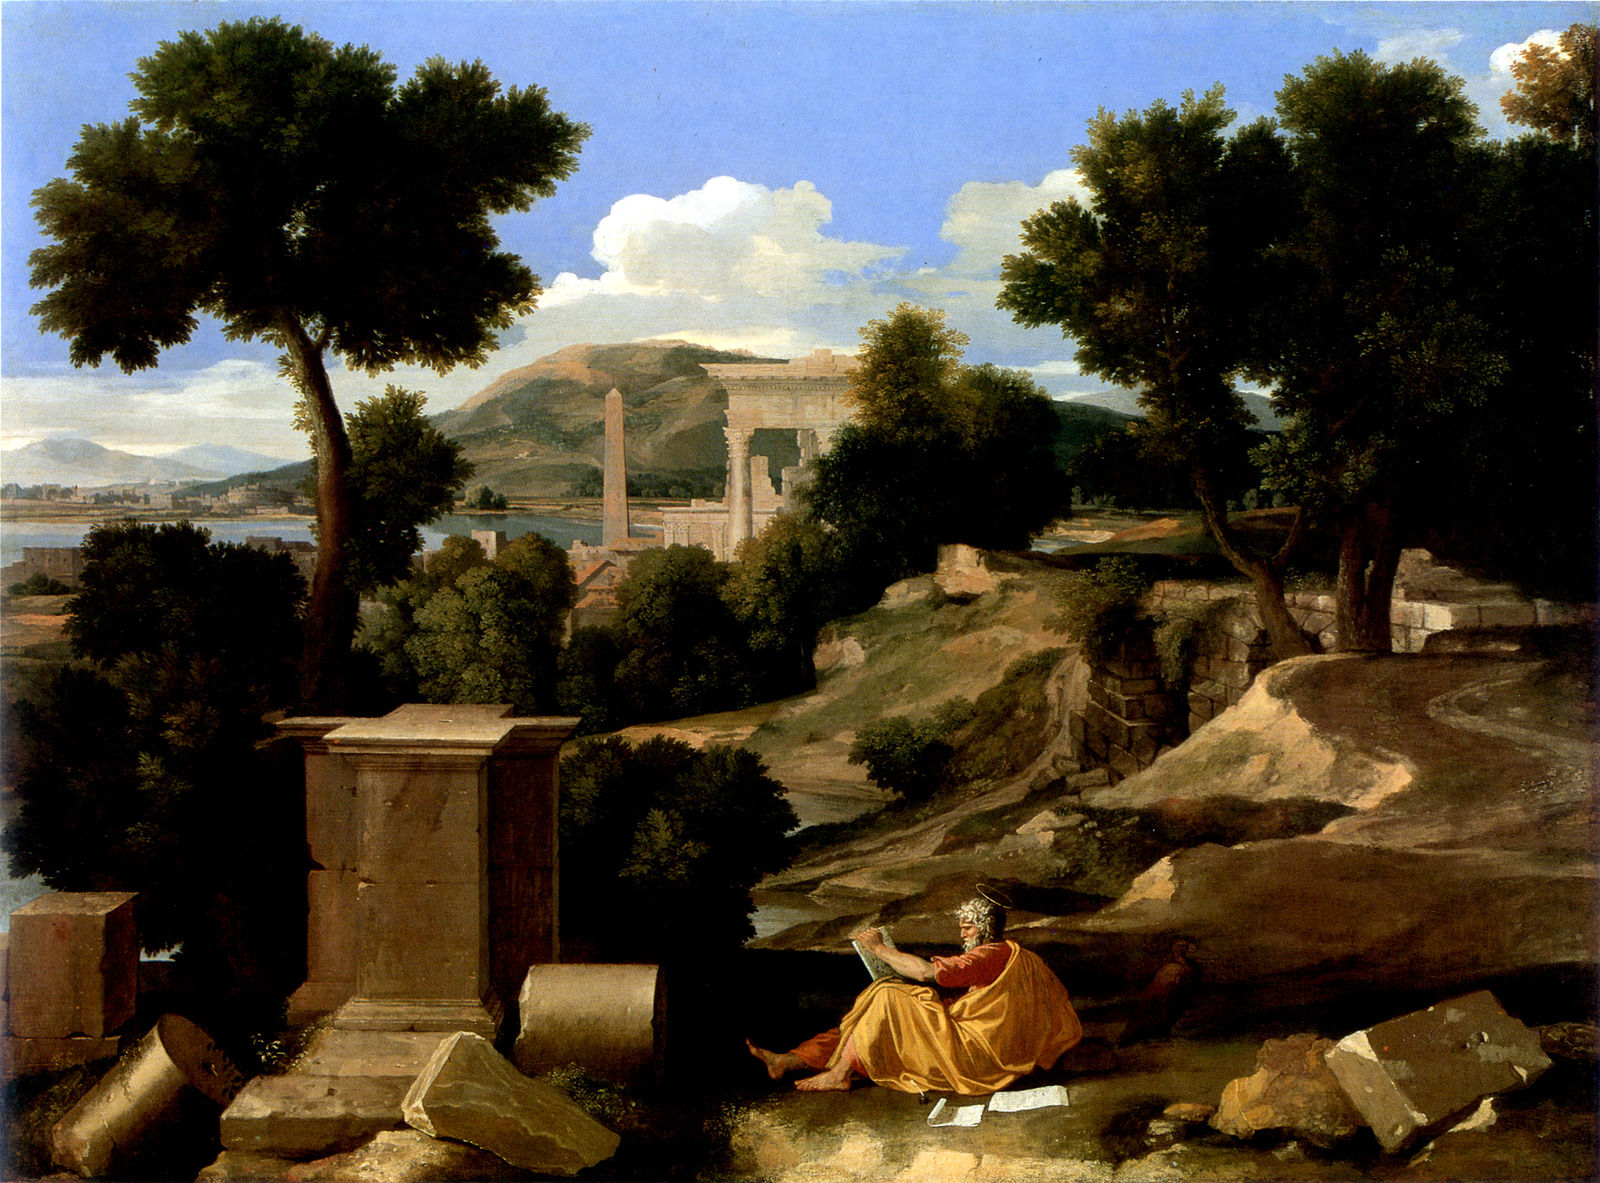 An outdoor scene of Greek ruins with a man sitting on the grass drawing